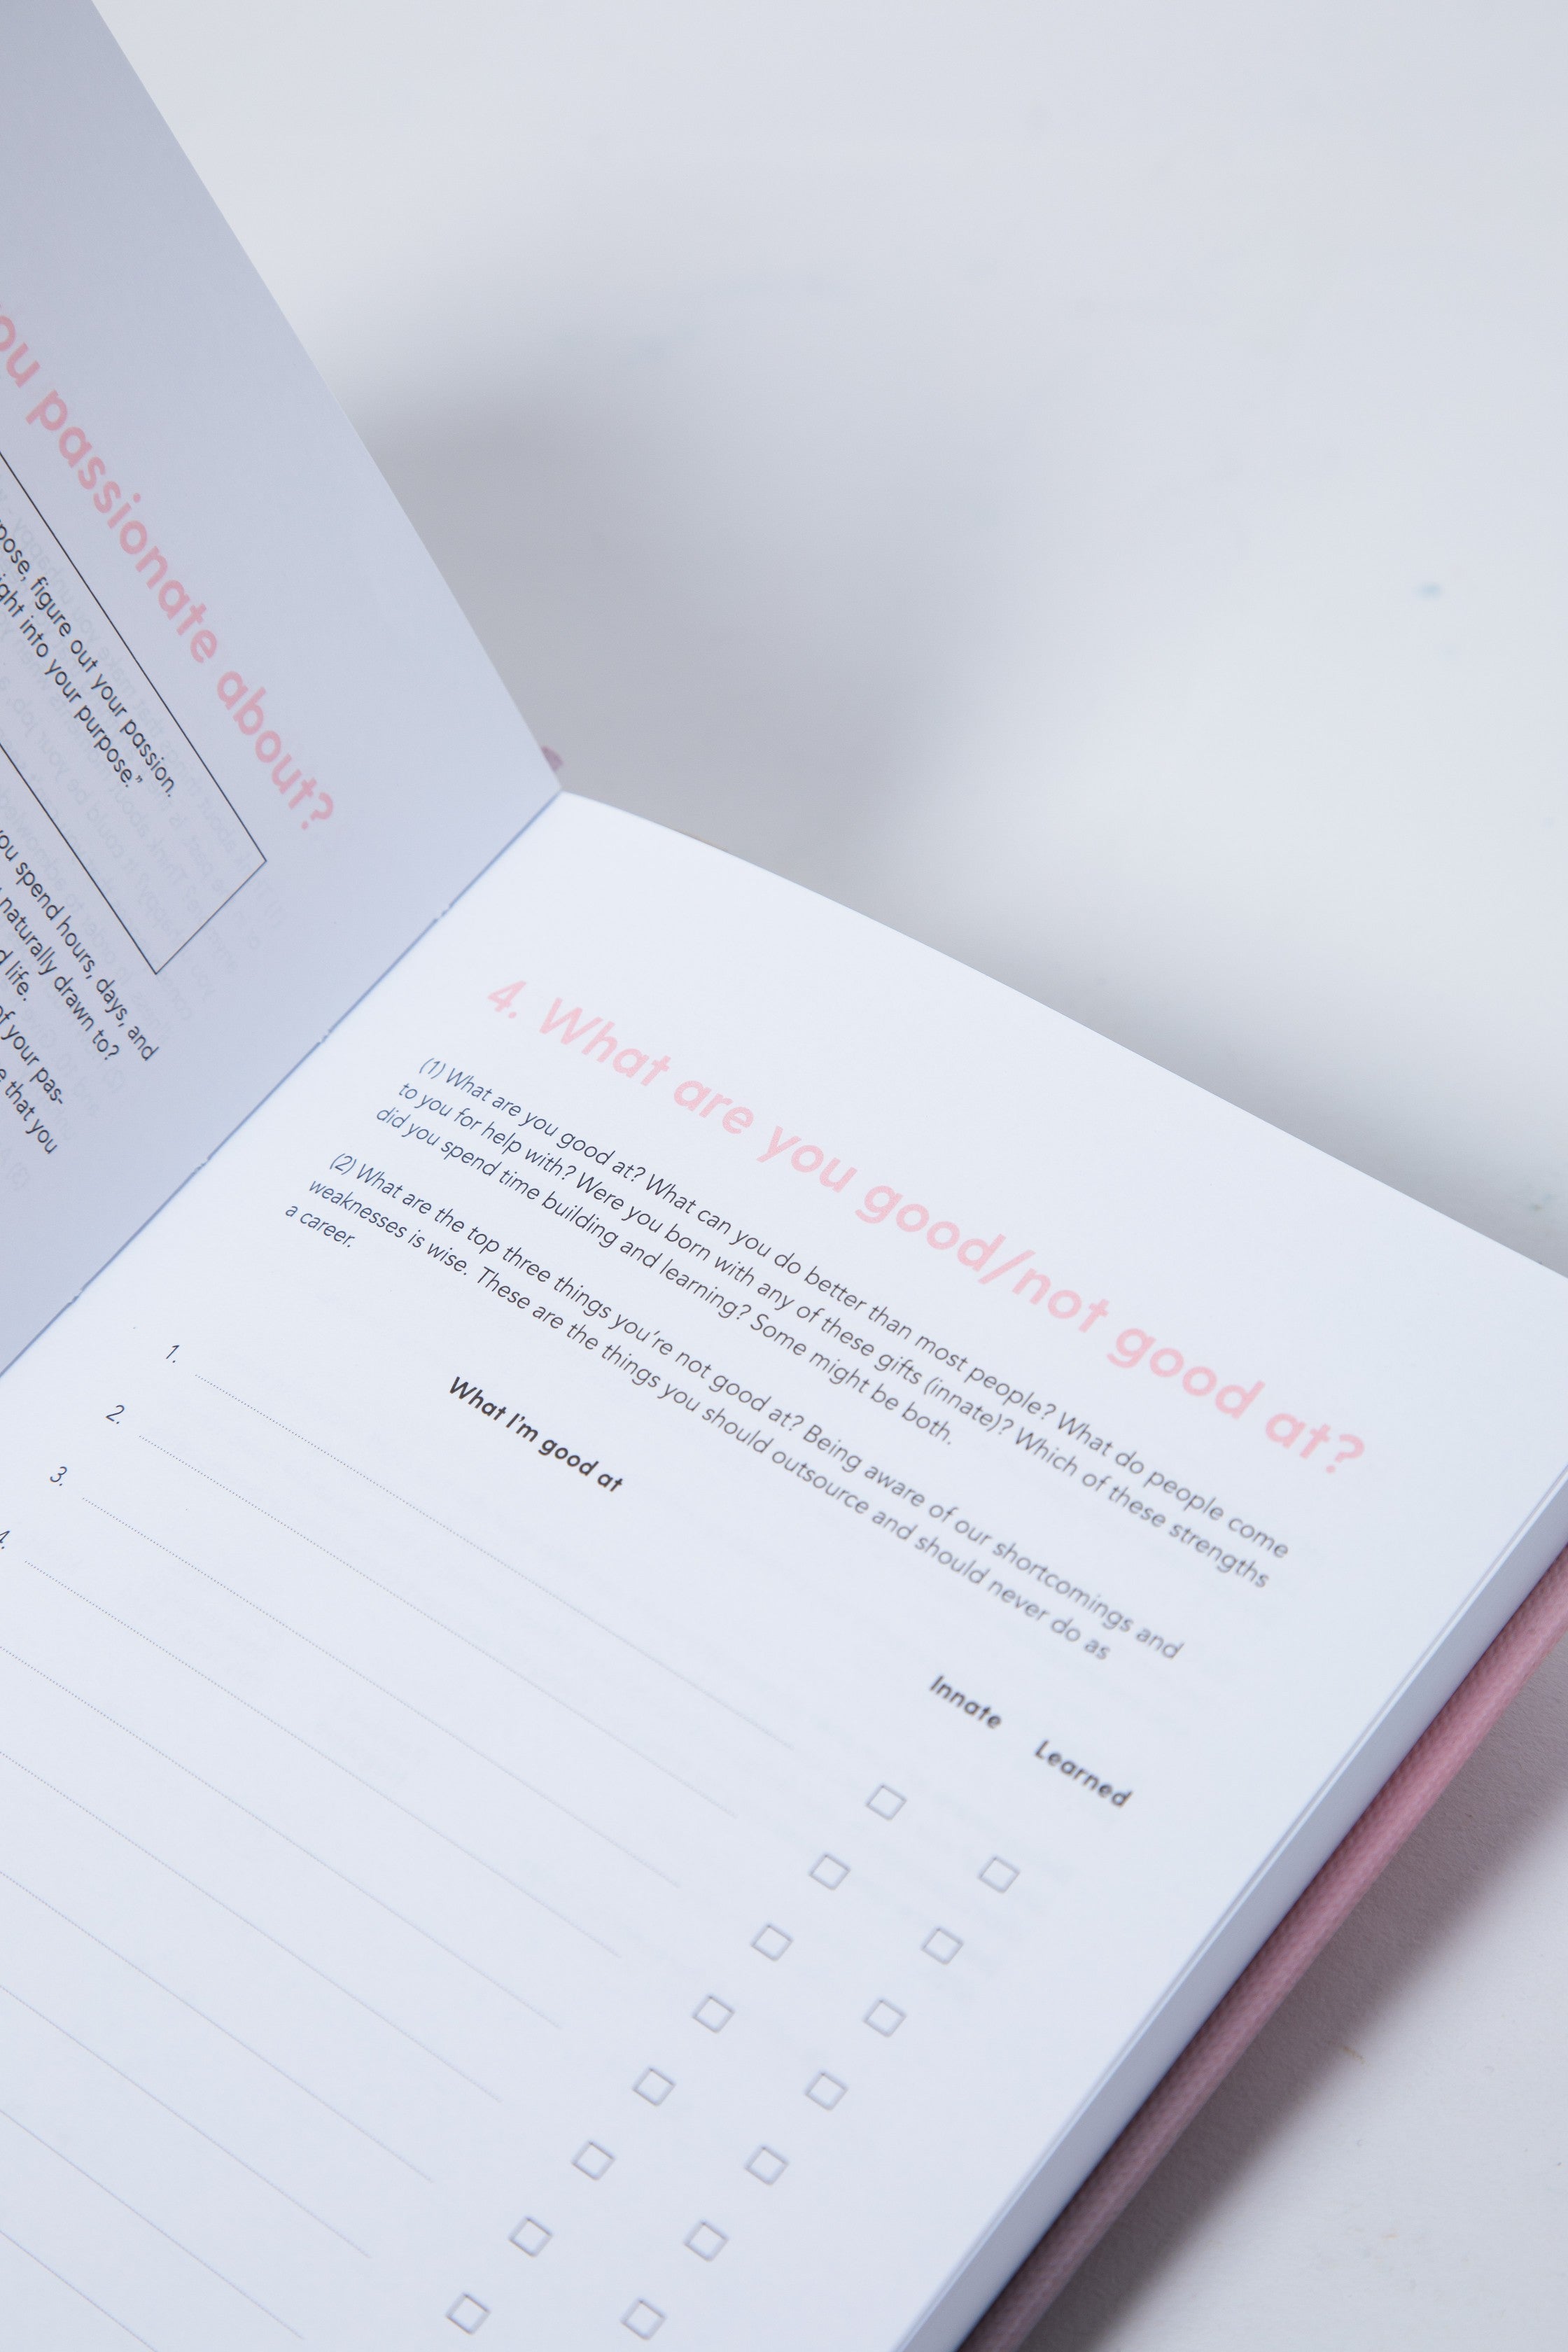 The 100-Day Planner | Pink & Charcoal - The Happiness Planner®